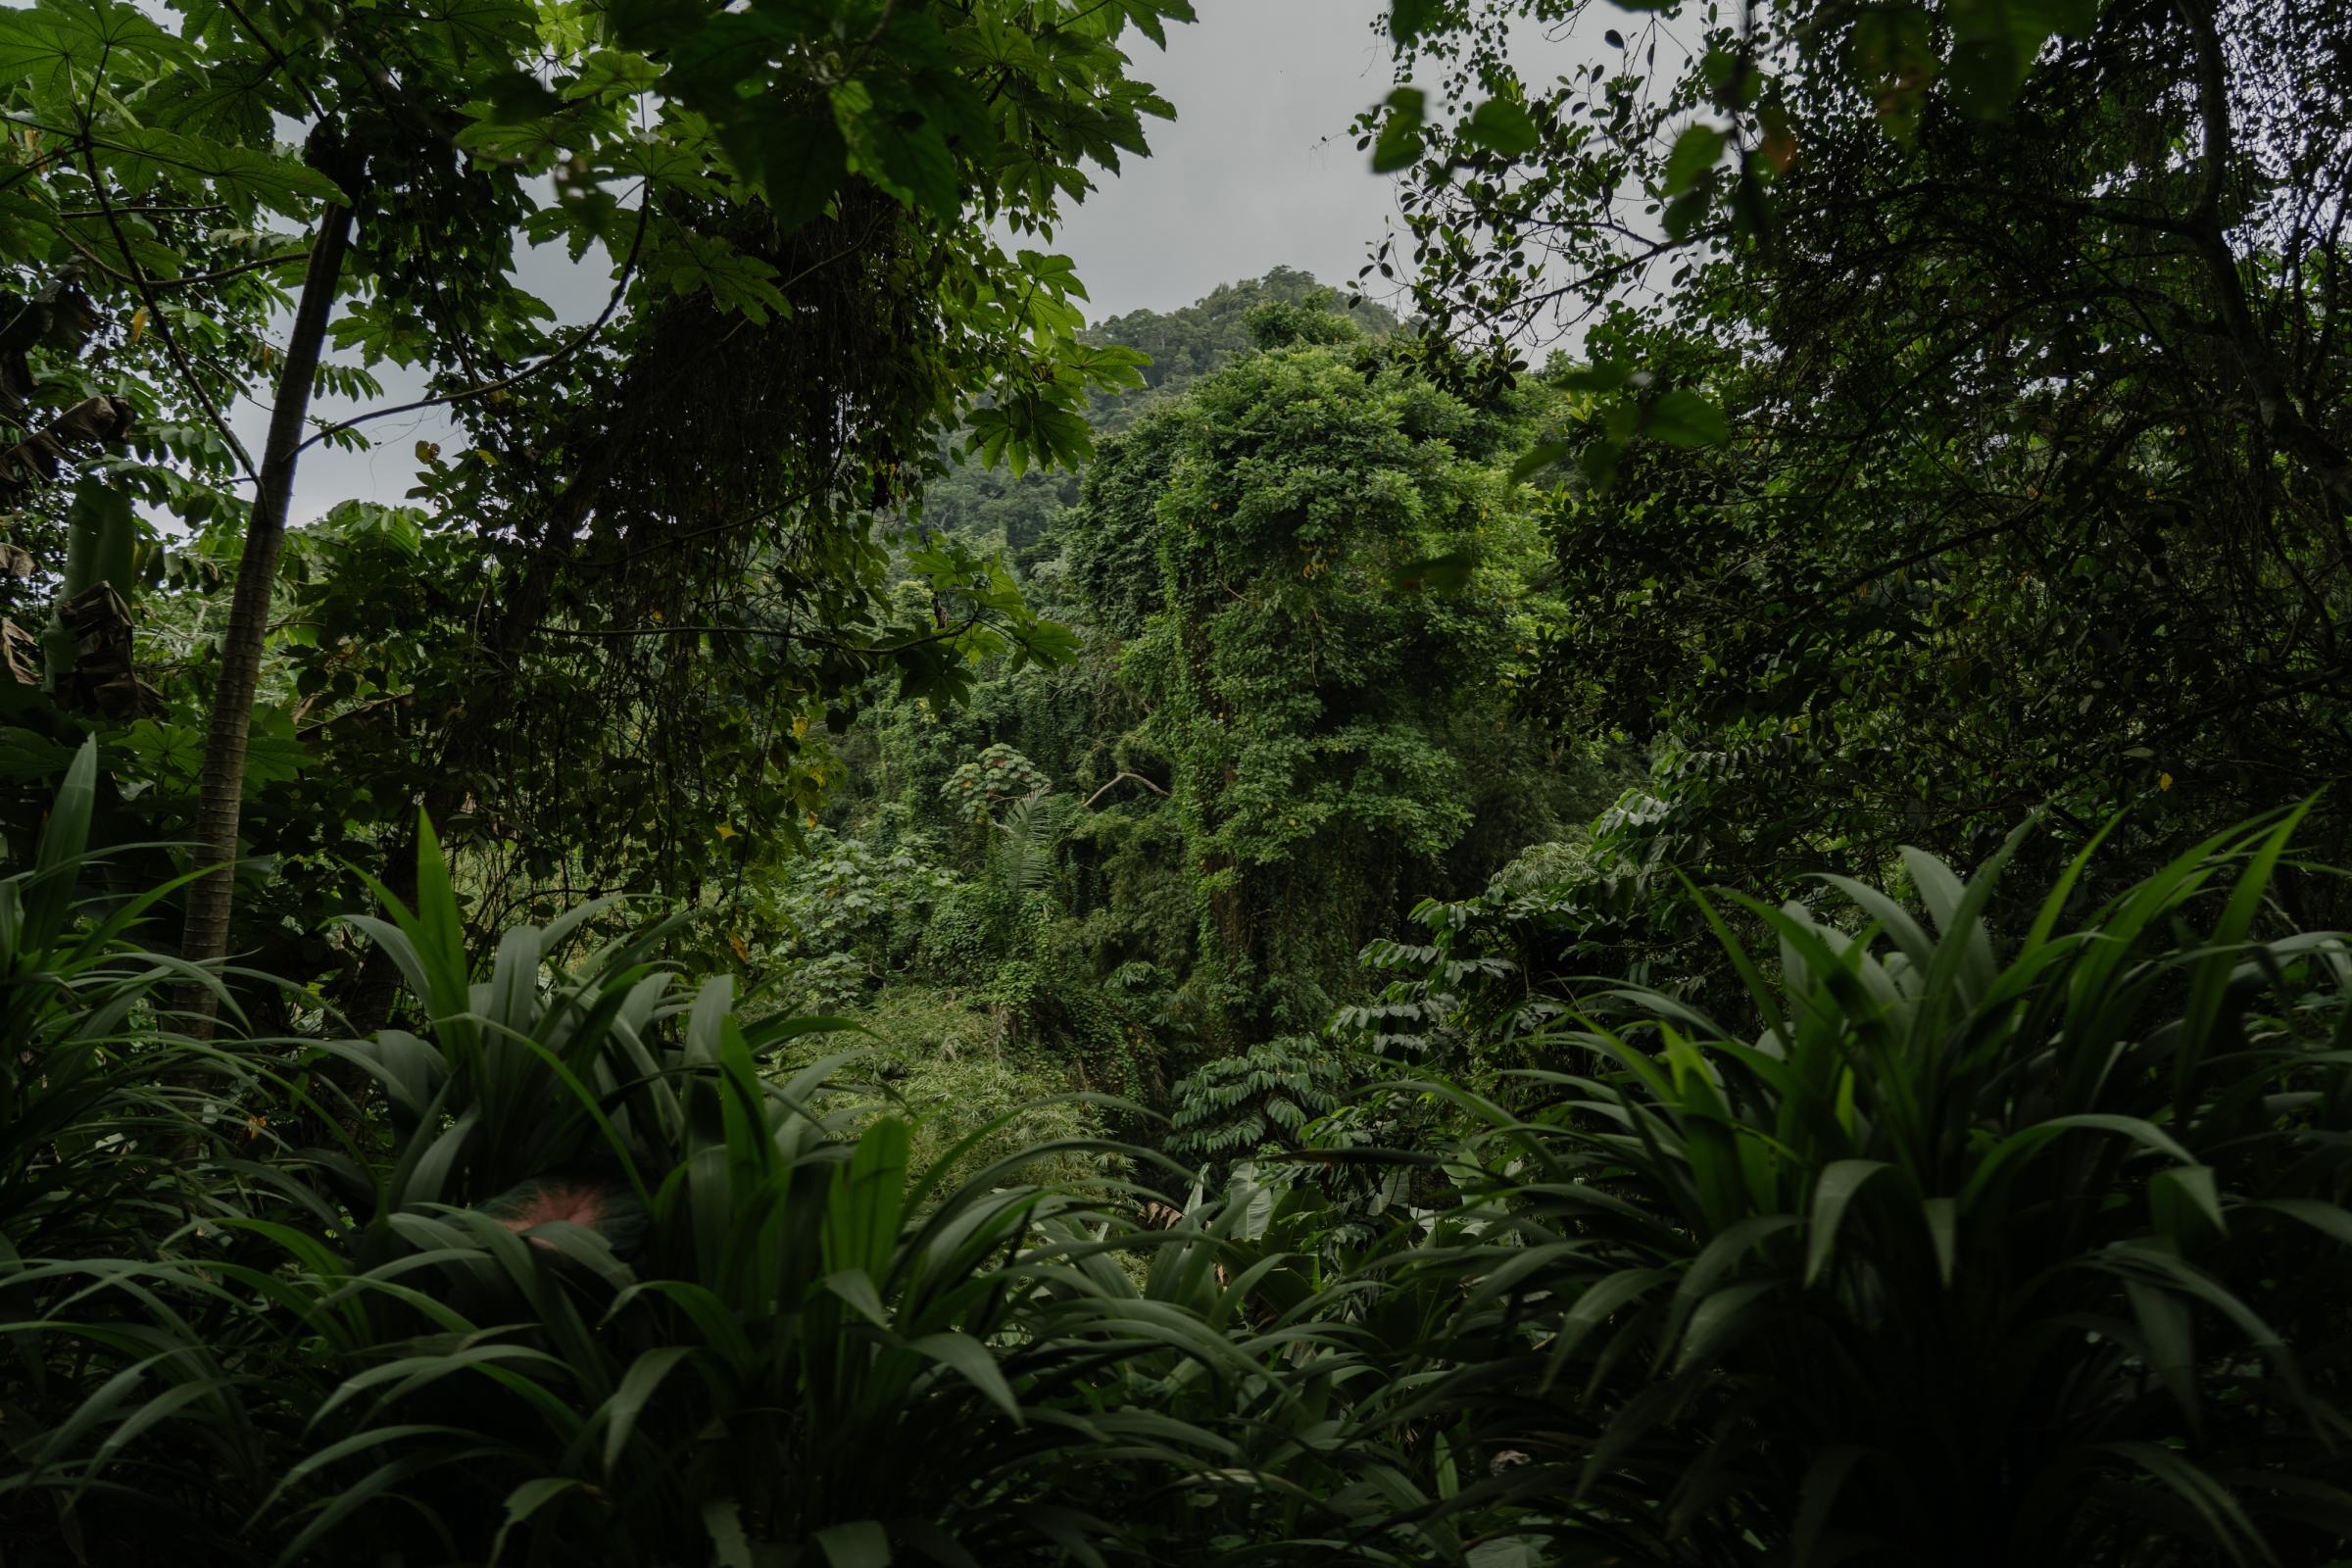 Genetic Engineering In the Mosquito War - The road through the dense jungle on the island of...